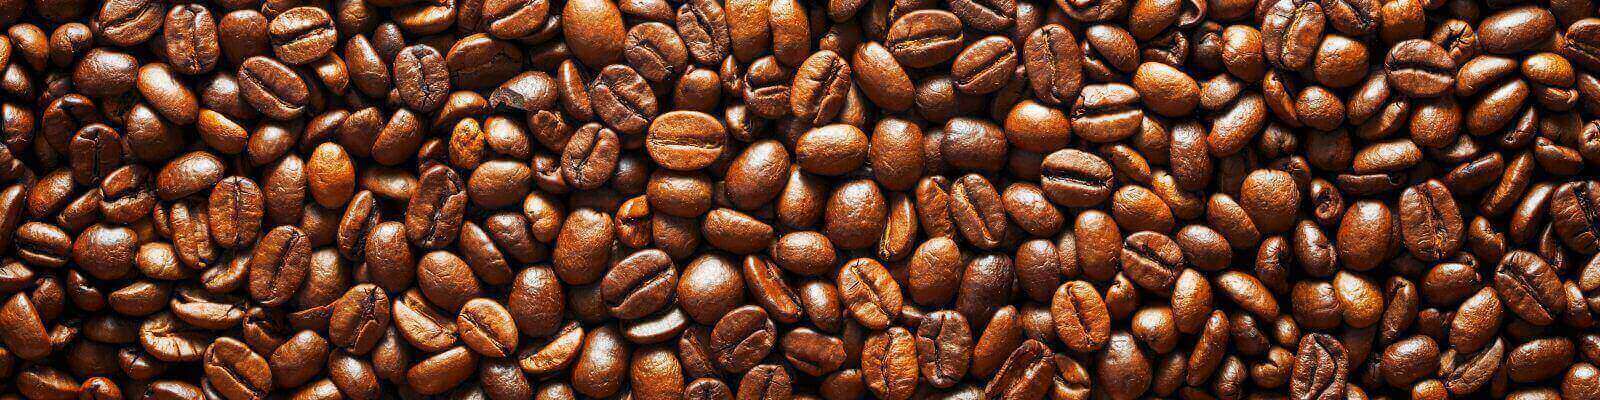 Where Produces the Best Coffee in the World?